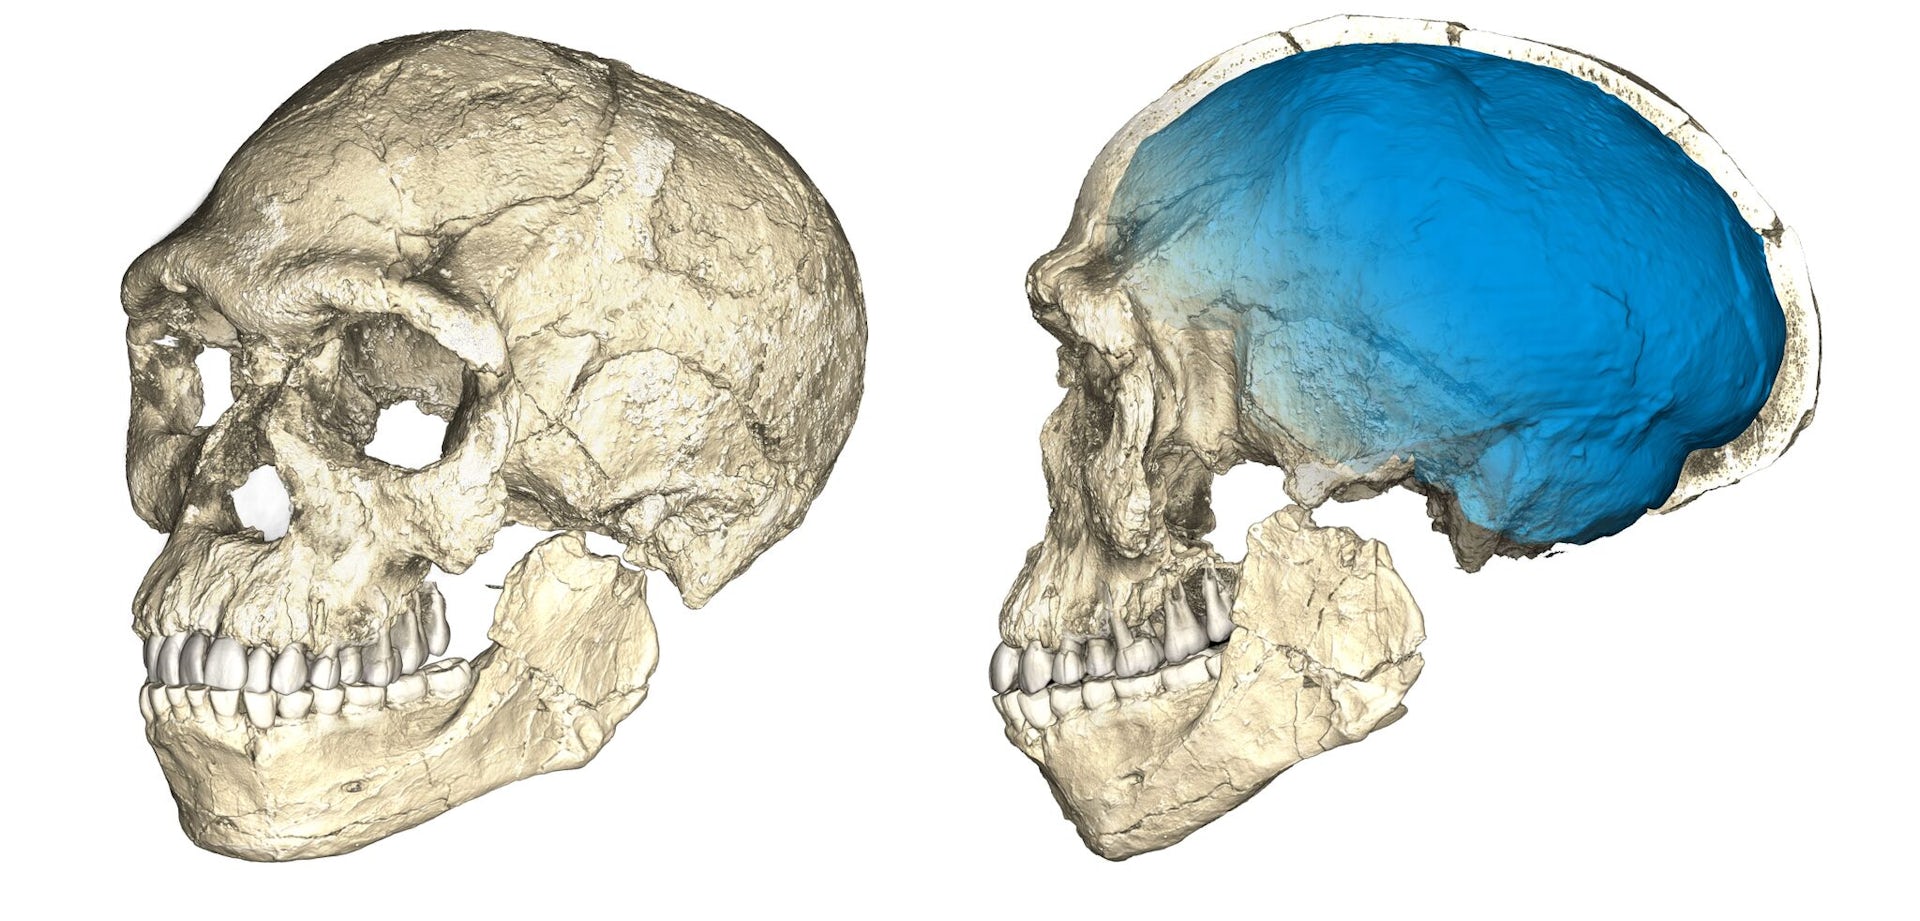 New Moroccan fossils suggest humans lived and evolved across